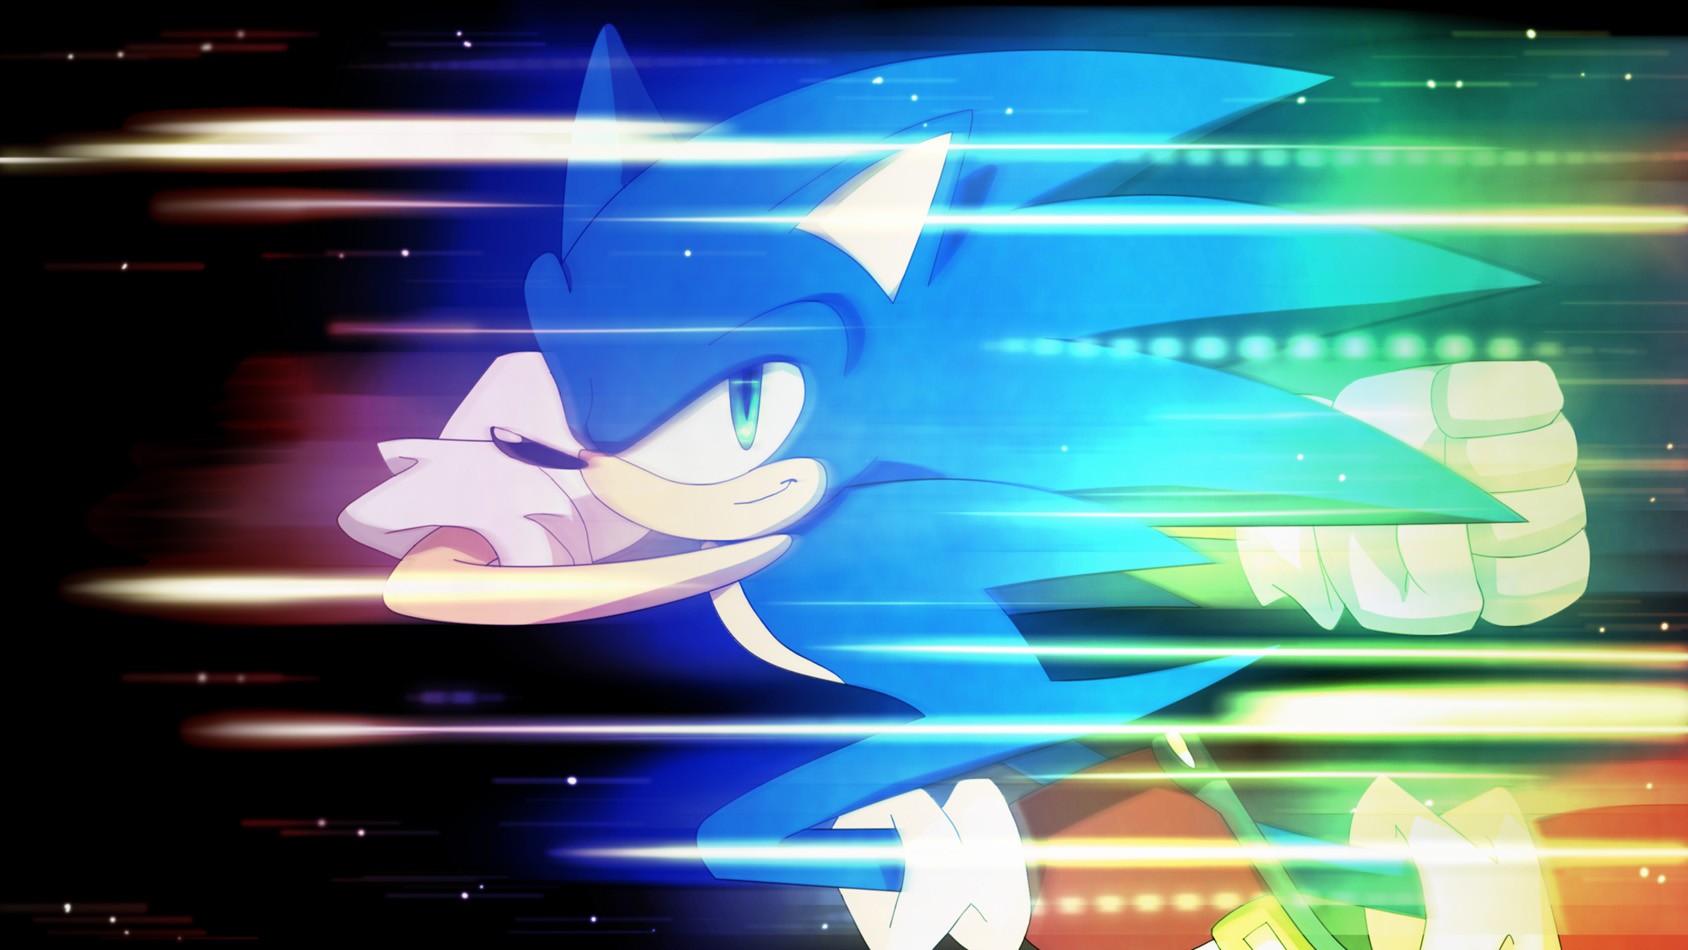 General 1688x950 video games blurred colorful black background running Sonic the Hedgehog video game characters Sega